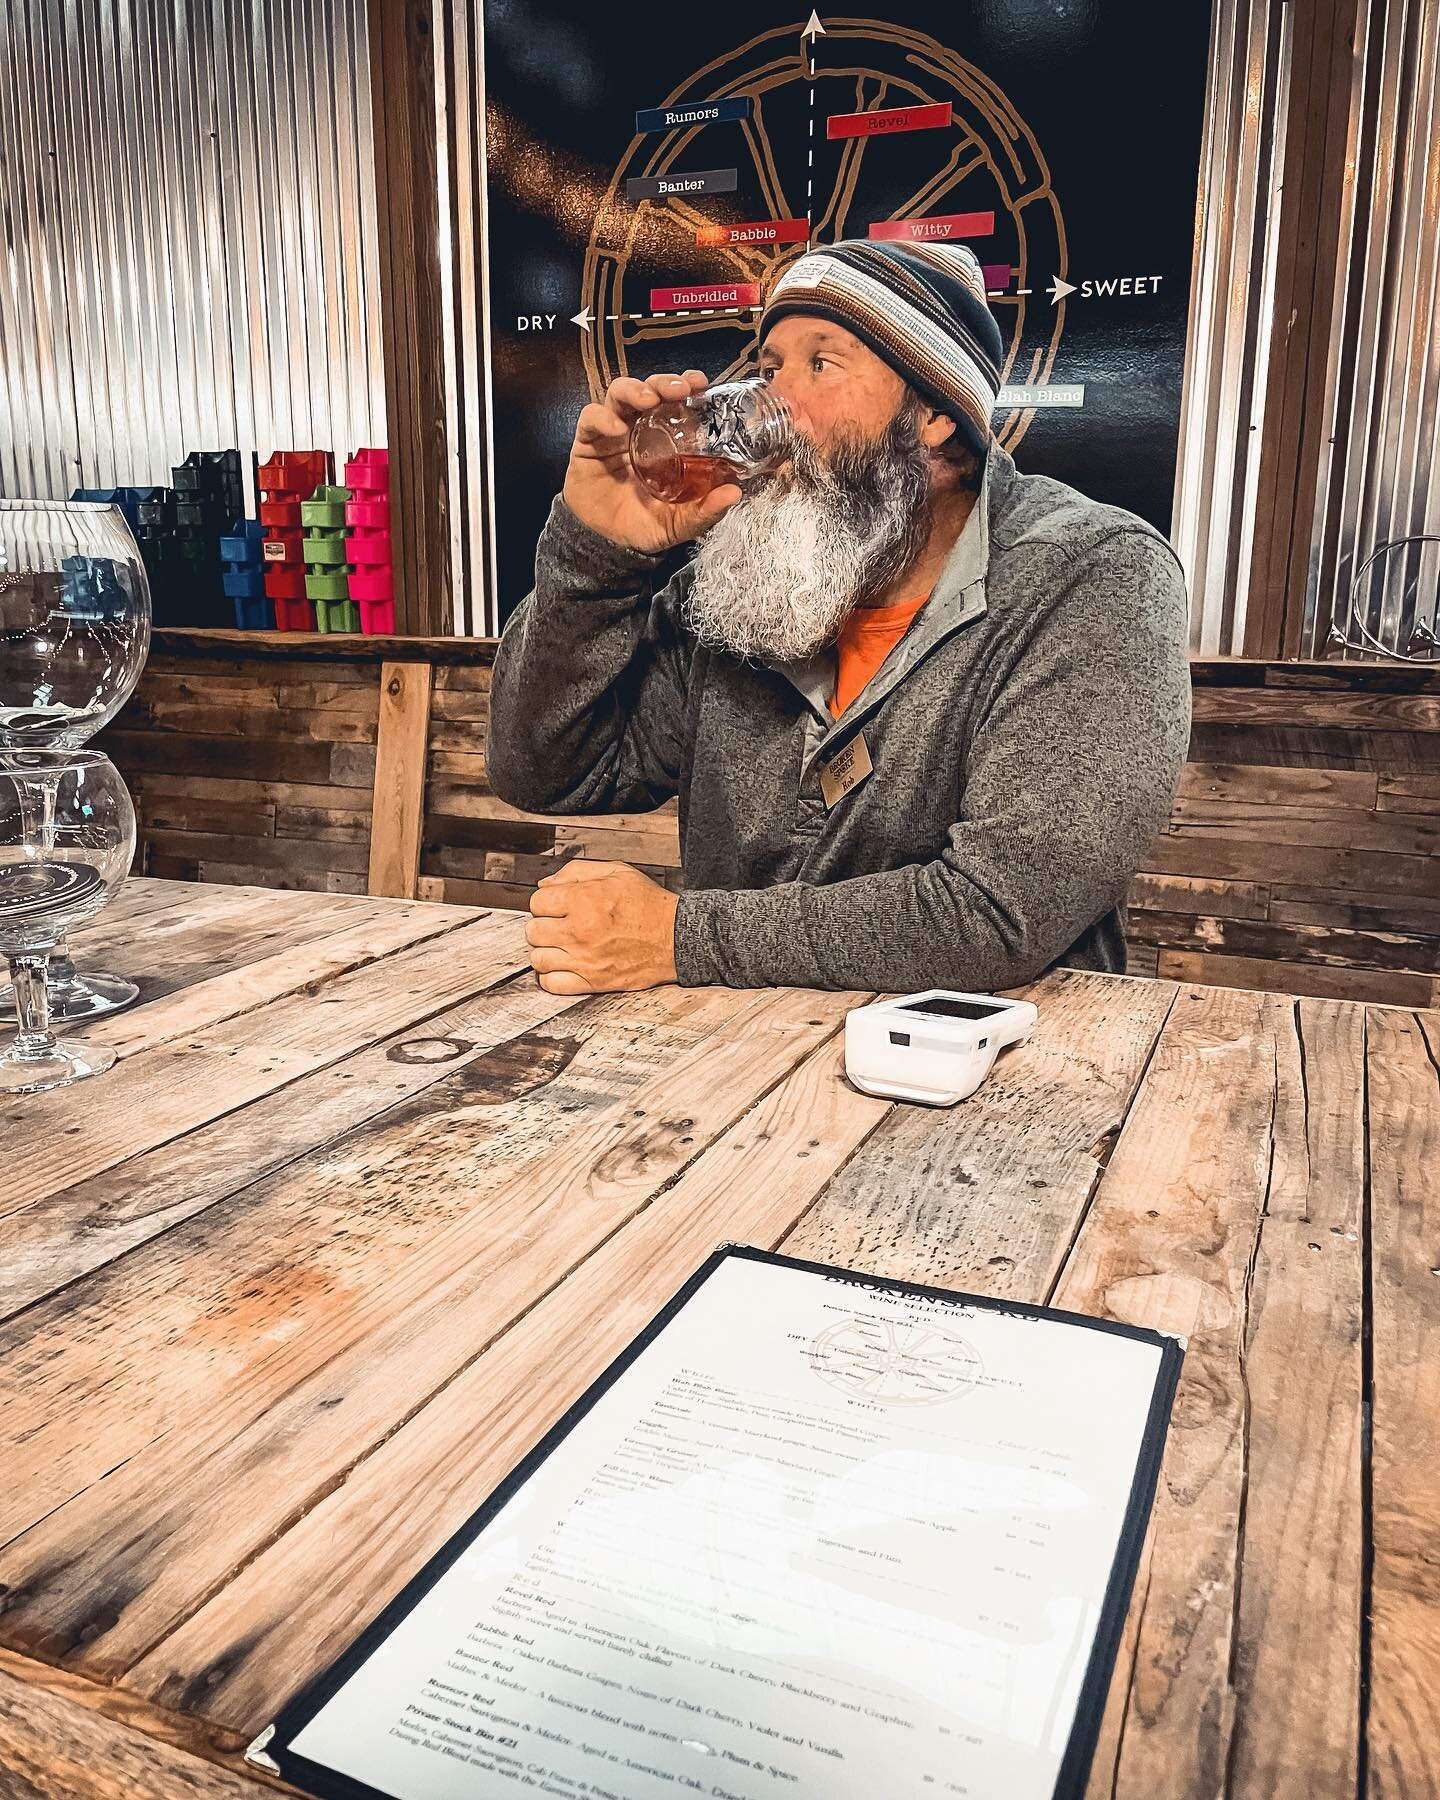 Santa?? Is that you??
🎄🎅🏻
Co-owner, wine-maker, Santa-to-be, and Cider aficionado, Rob Hall sampling his product before the doors opened for our 2022 Holiday Sip &amp; Shop 🎅🏻